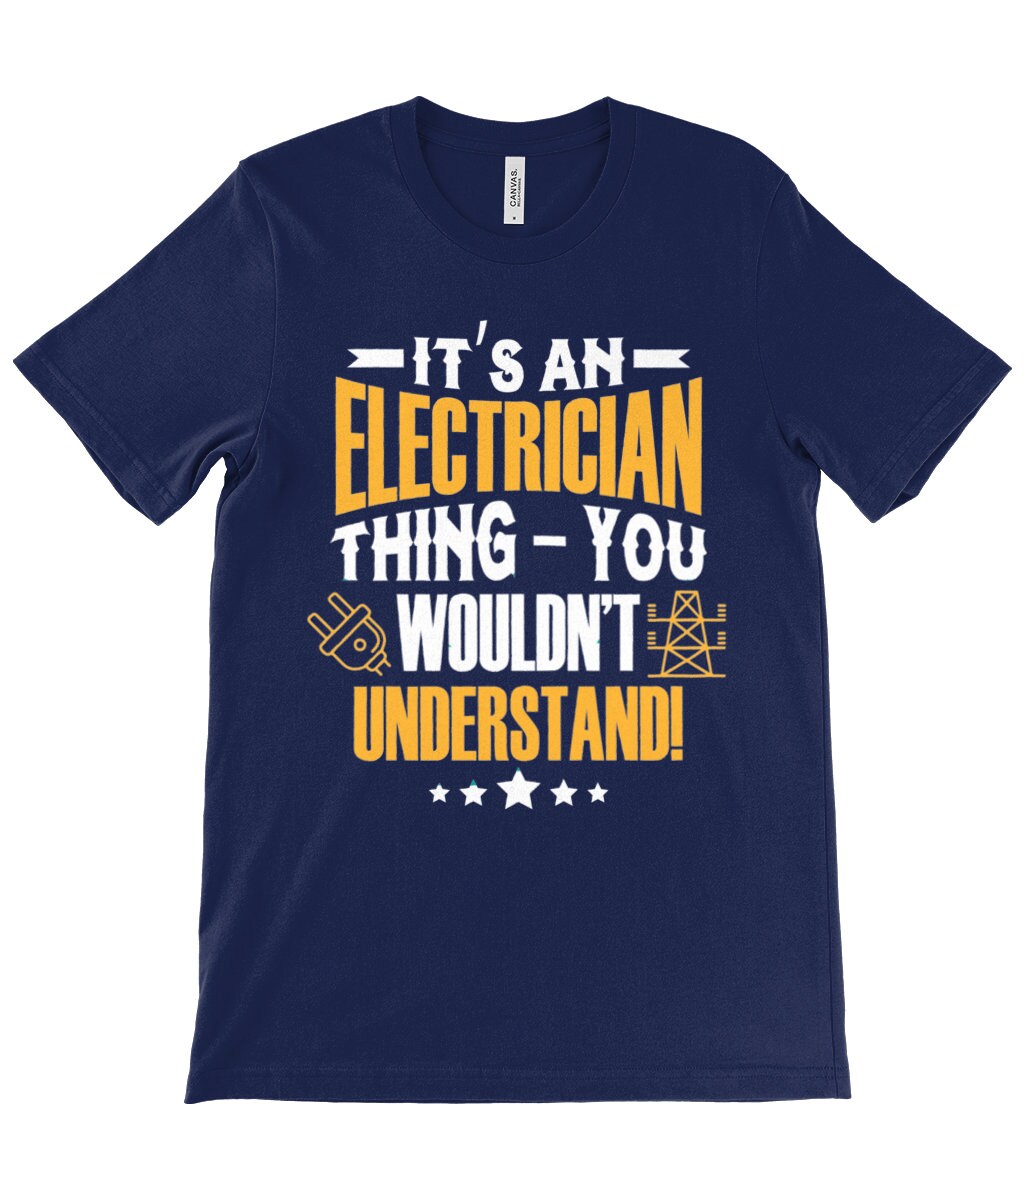 It’s an electrician thing – you wouldn’t understand! T-Shirt